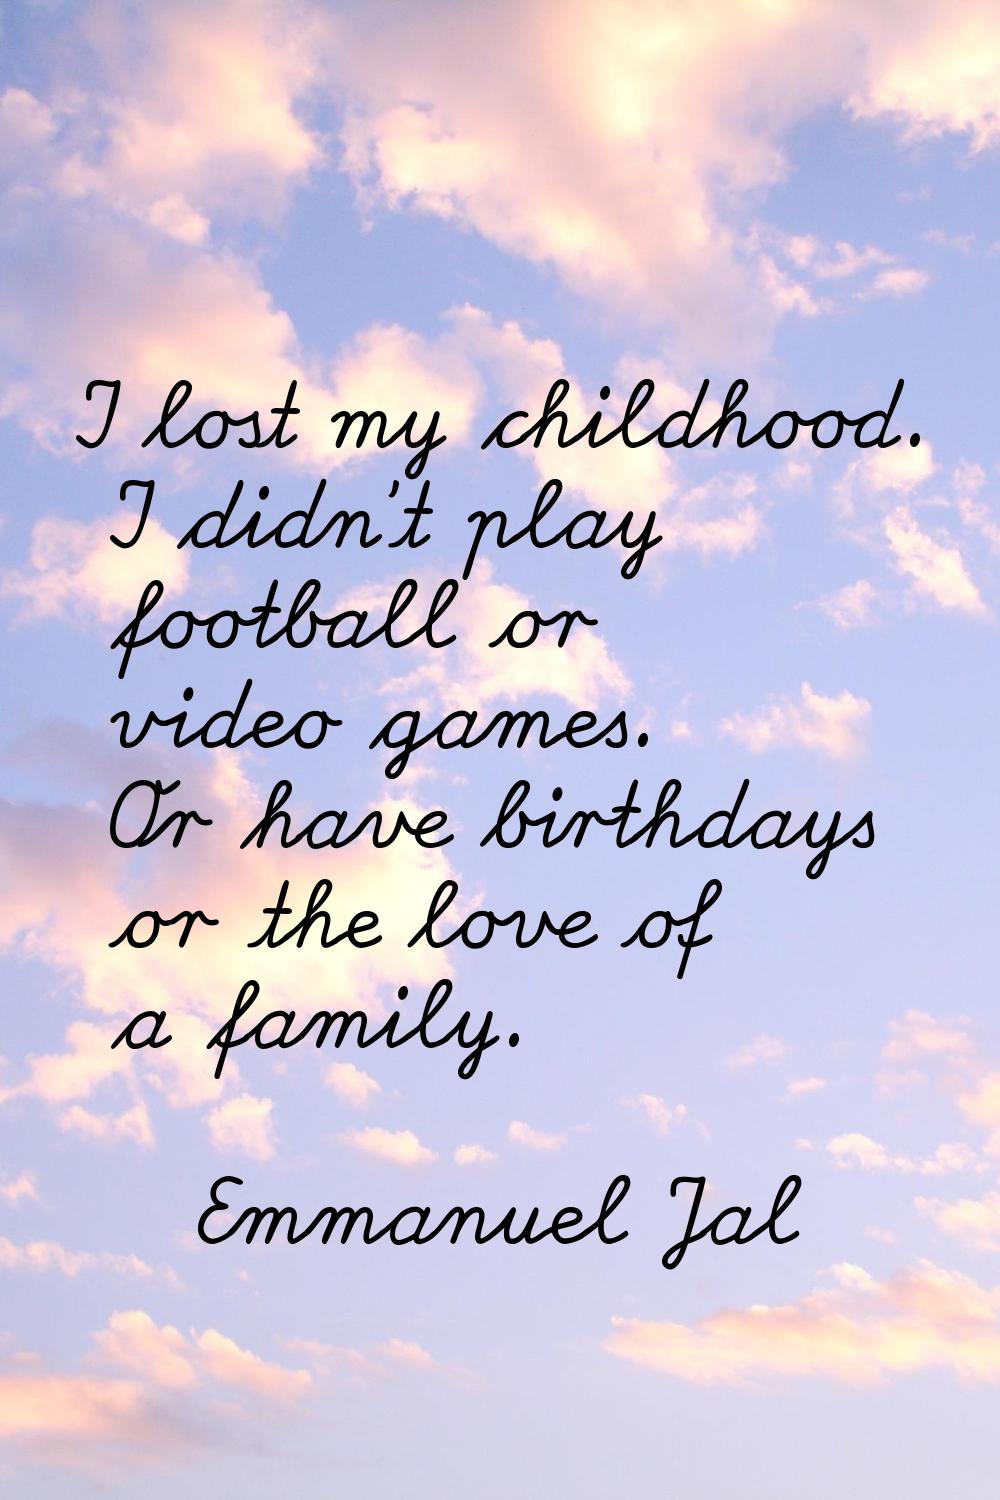 I lost my childhood. I didn't play football or video games. Or have birthdays or the love of a fami